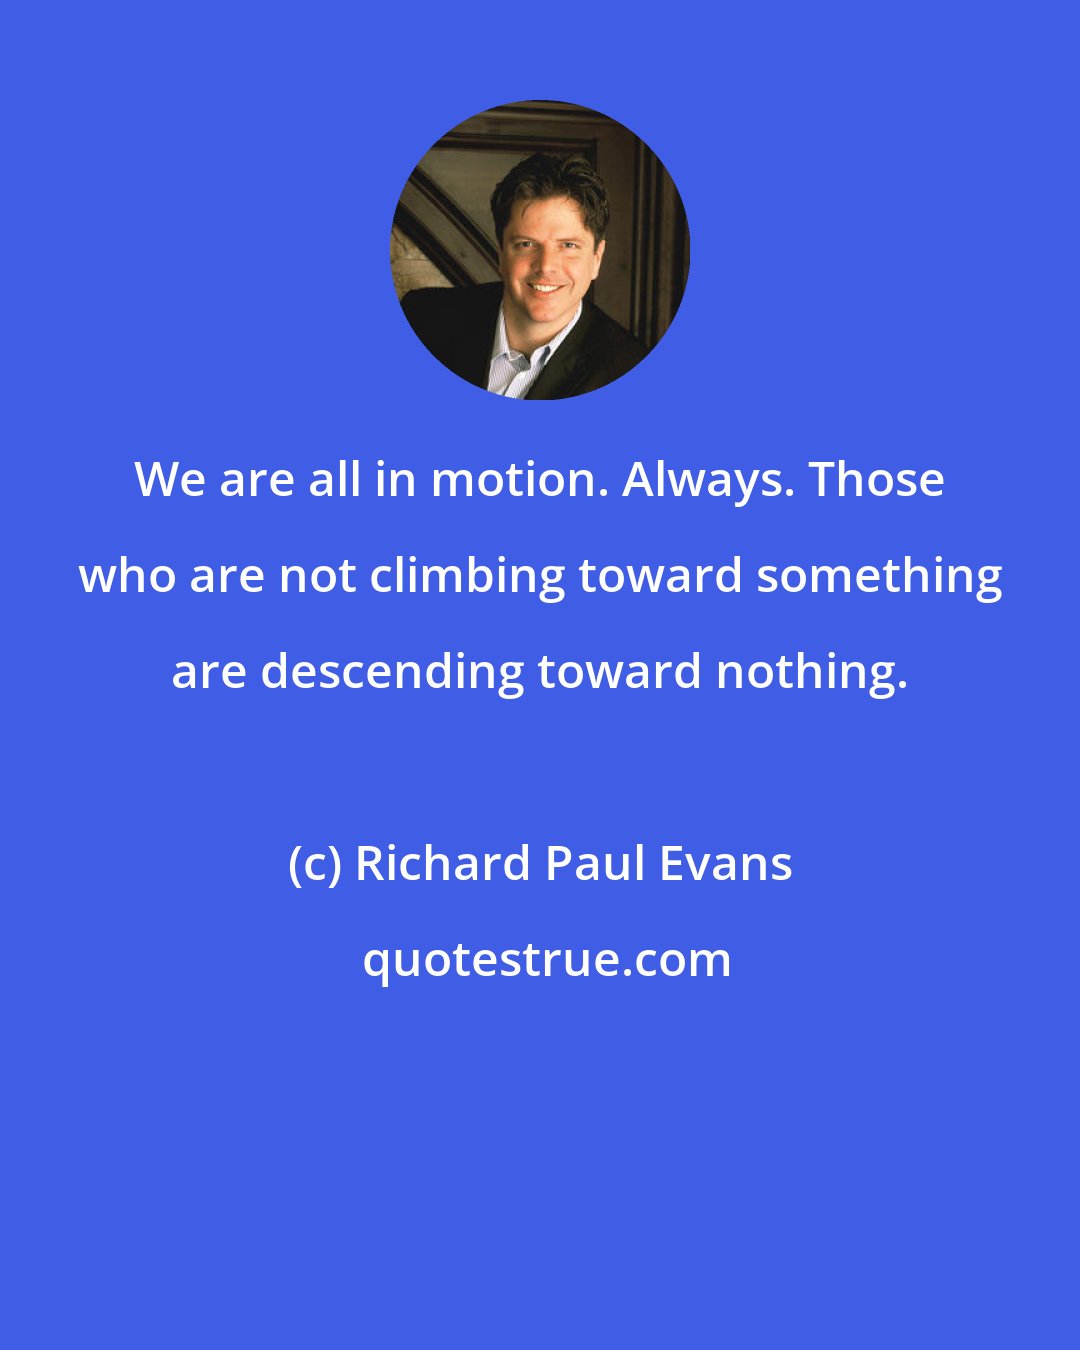 Richard Paul Evans: We are all in motion. Always. Those who are not climbing toward something are descending toward nothing.